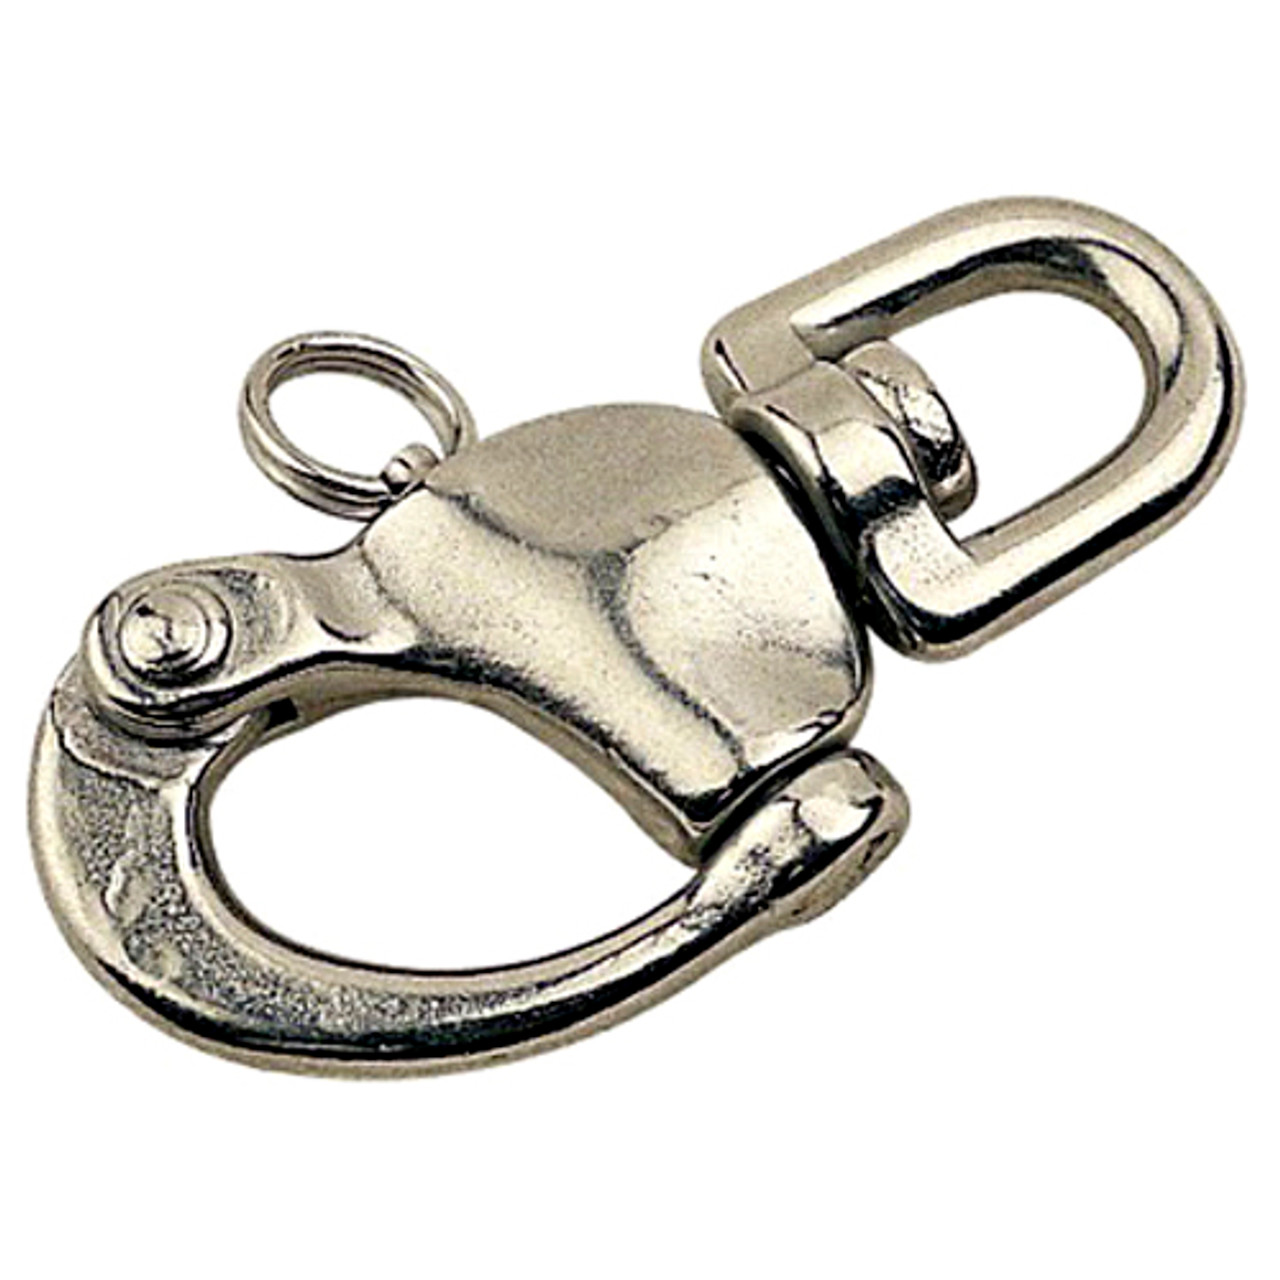 Sea Dog Stainless Steel Fast Eye Safety Snap Hook 146300-1